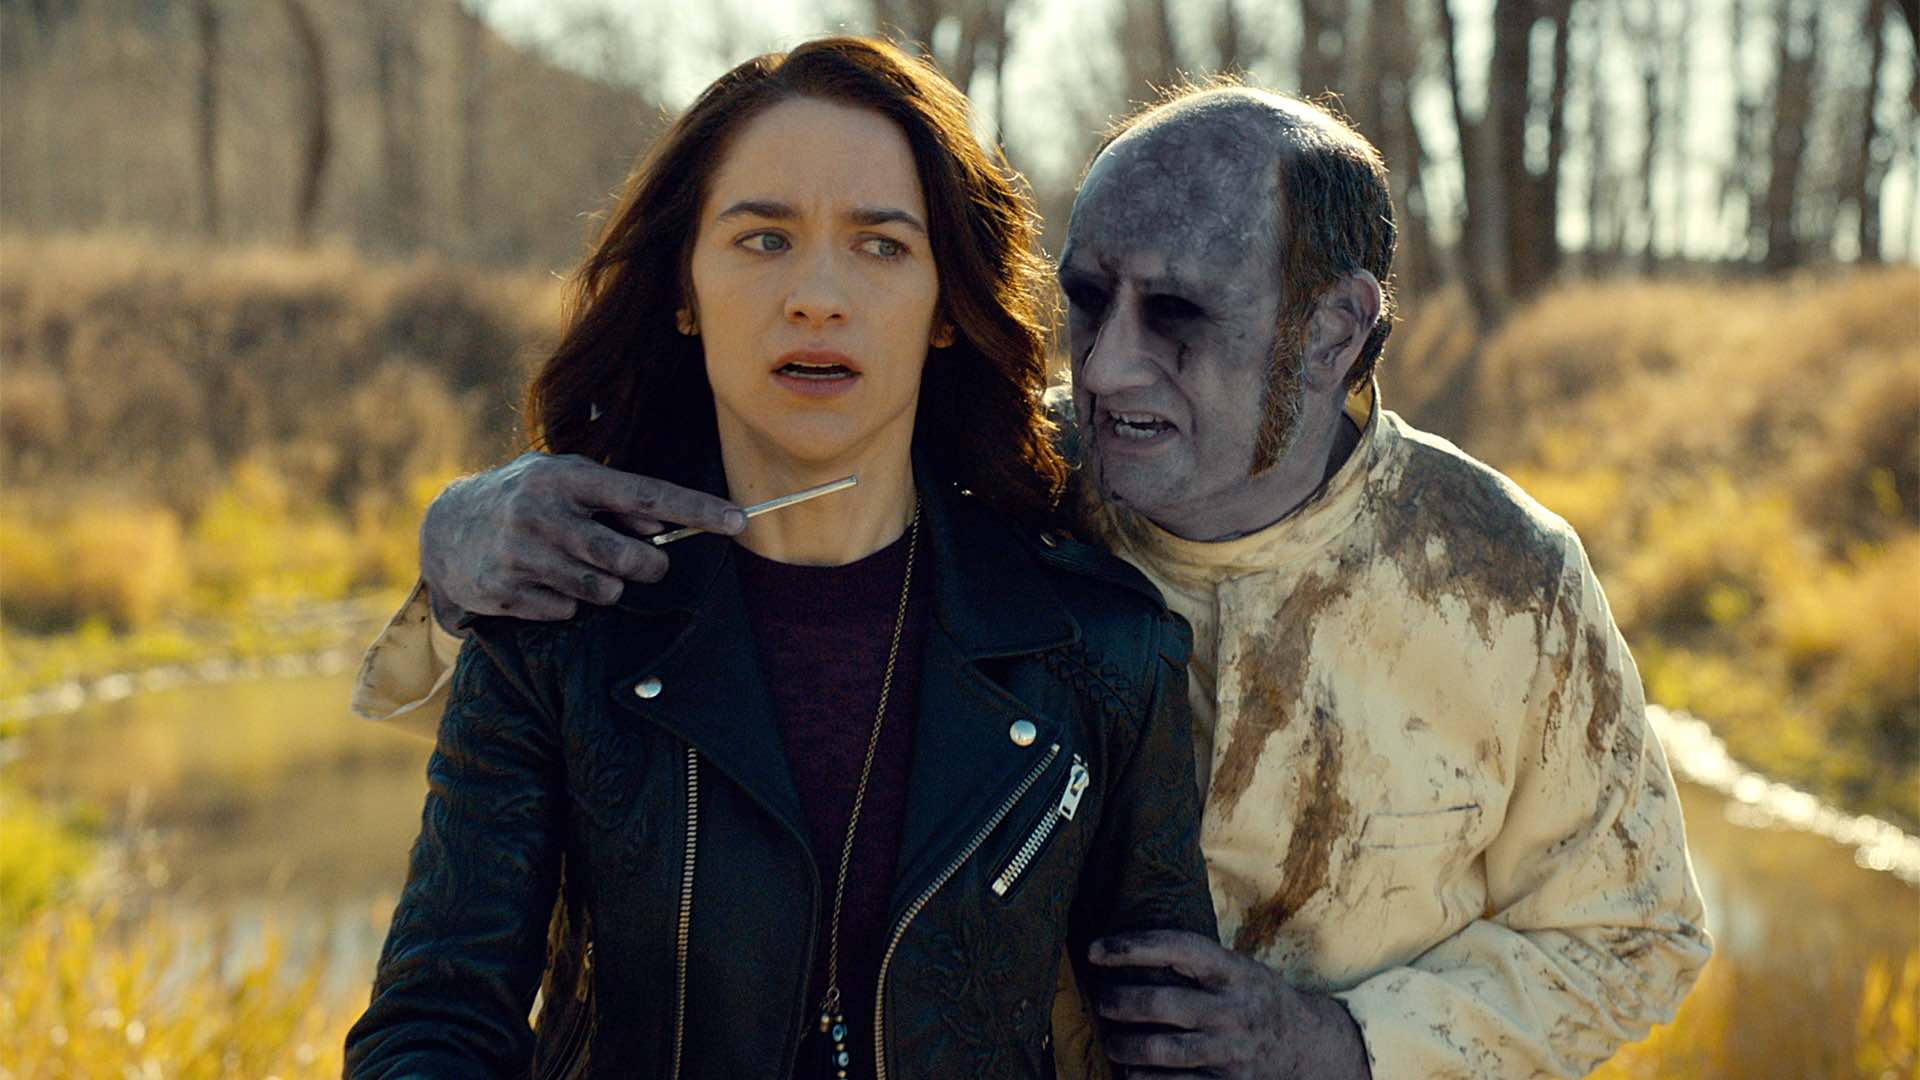 There’s a brouhaha going on surrounding the production of S4 of 'Wynonna Earp', which means no more happy endings in the town of Purgatory right now.